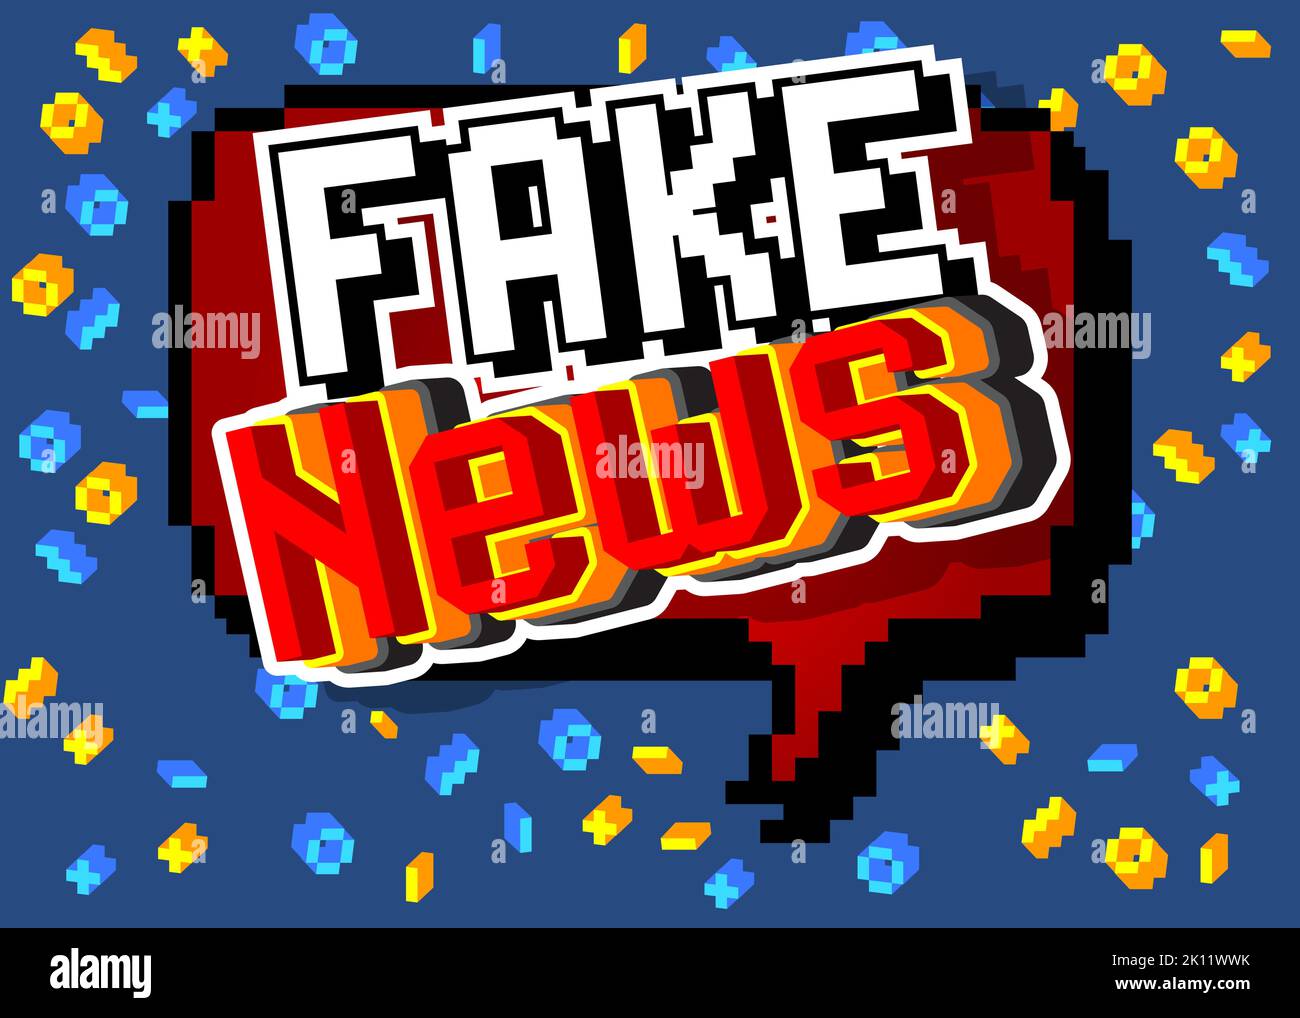 Fake News. Pixelated word with geometric graphic background. Vector cartoon illustration. Stock Vector